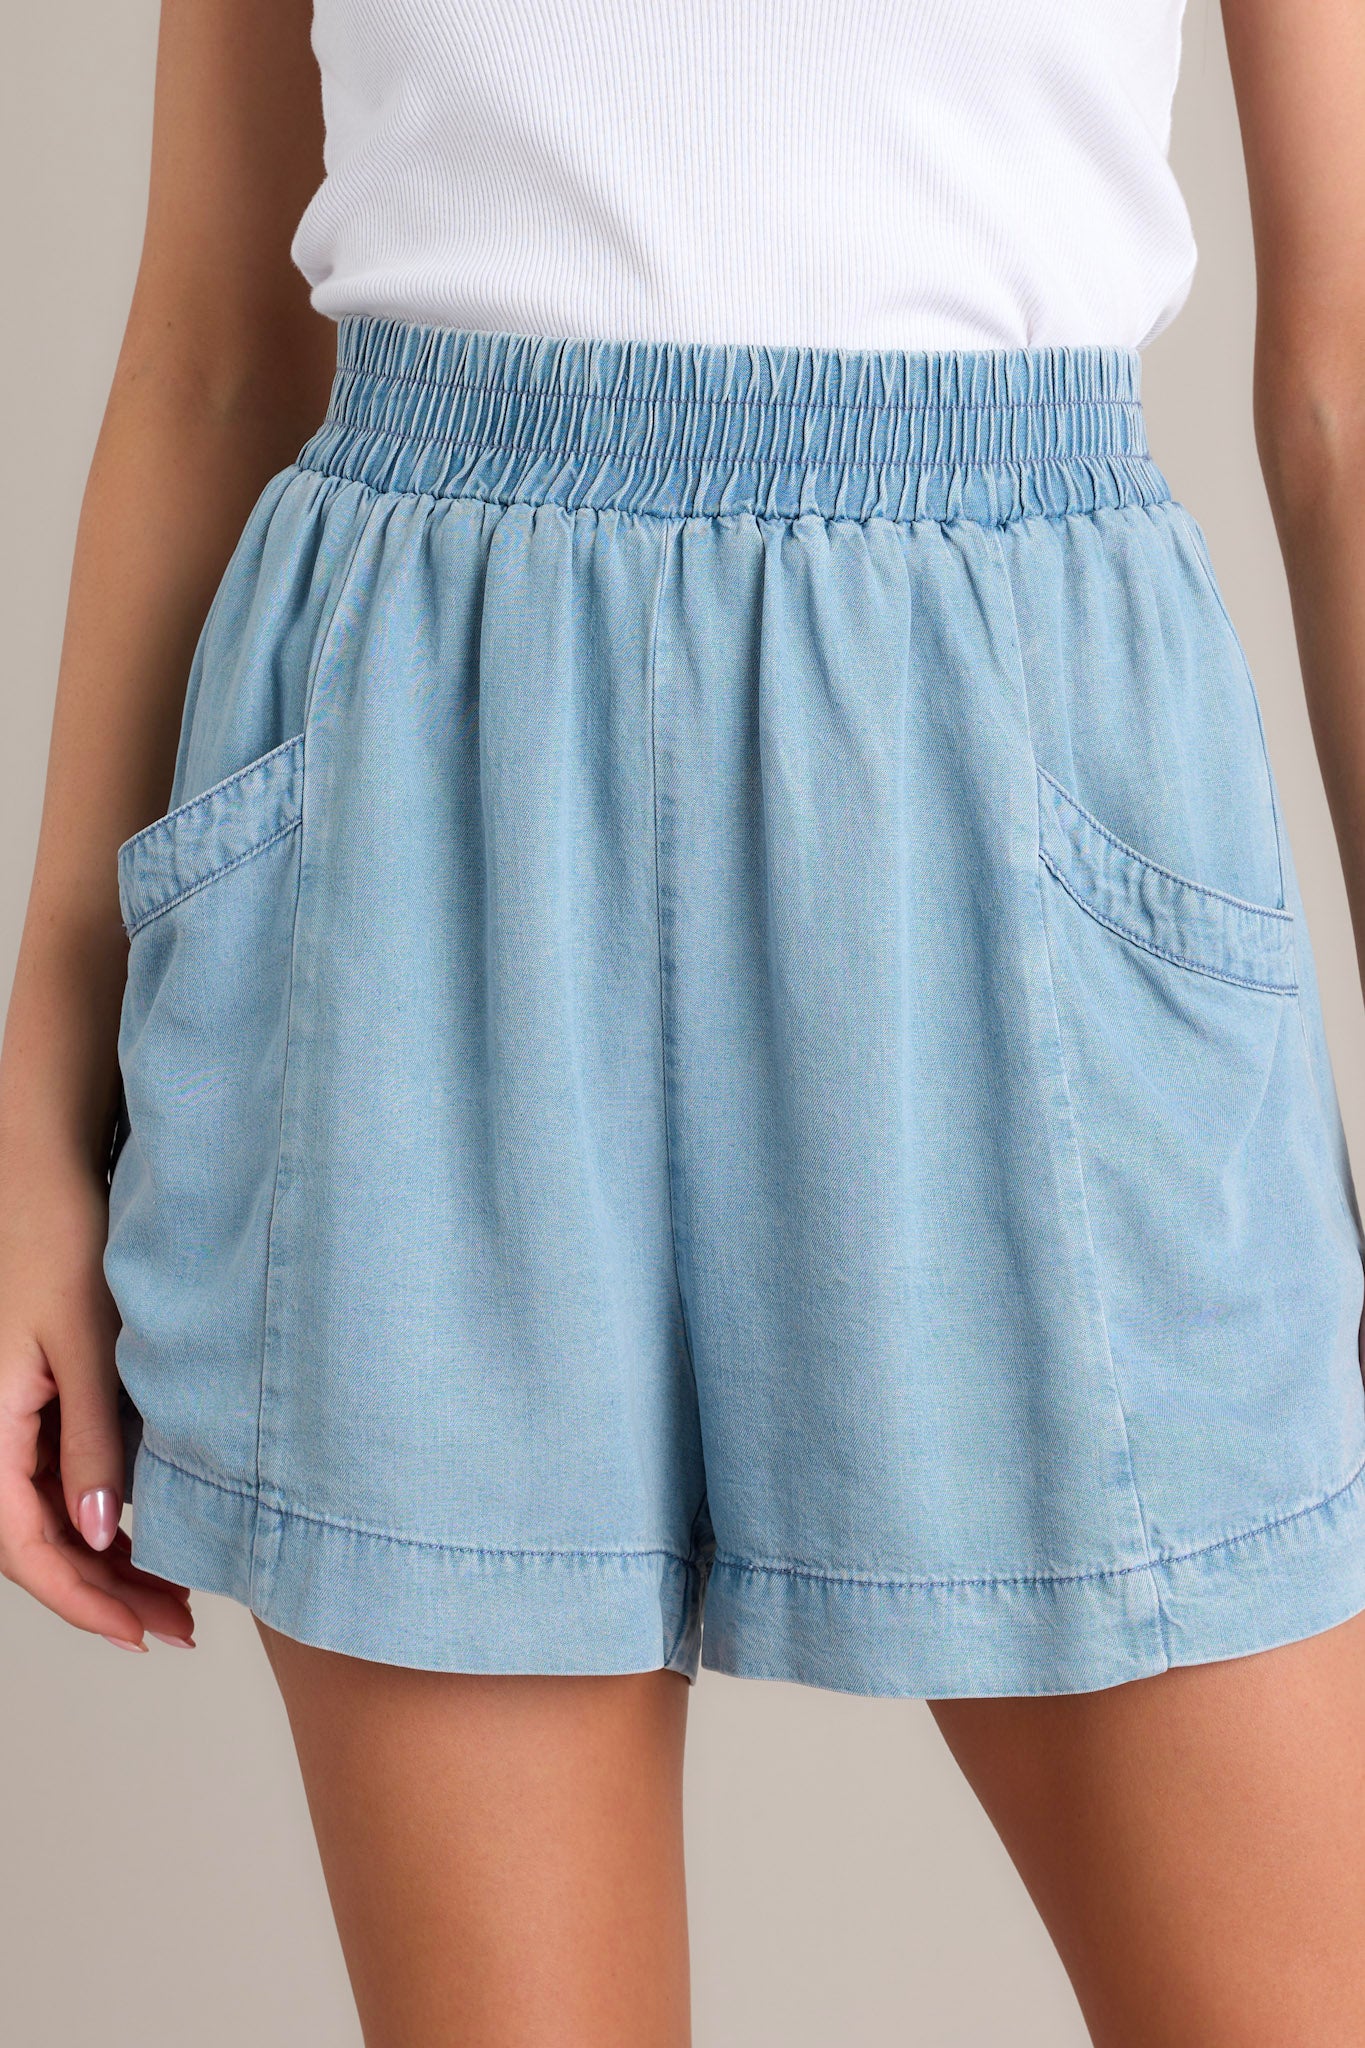 These light chambray shorts feature a high waisted design, an elastic waistband, large functional hip pockets, and a wide leg.